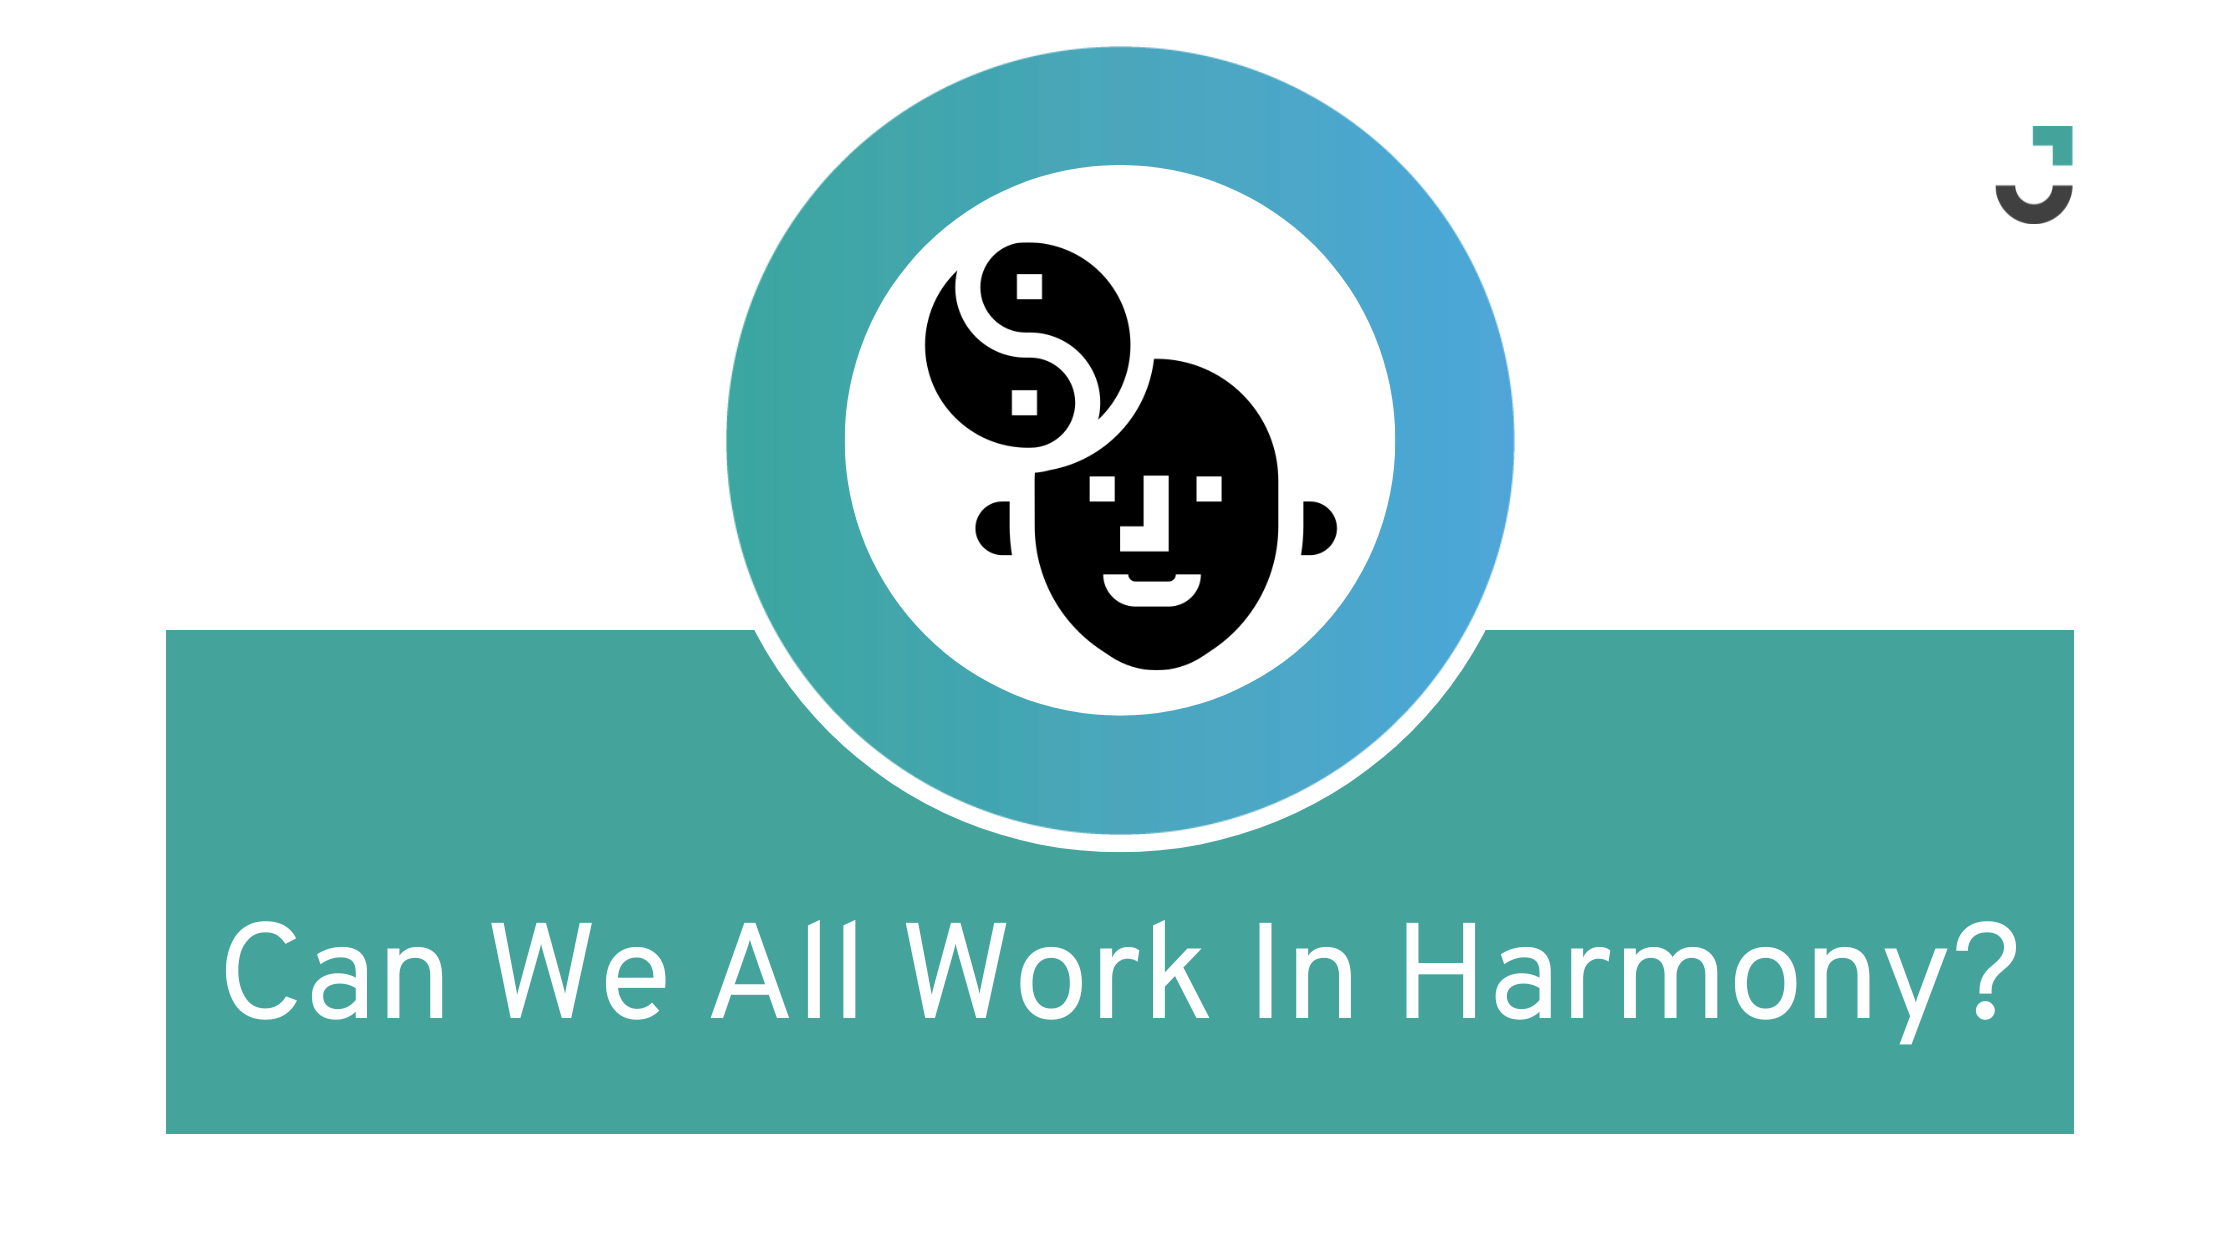 Can We All Work In Harmony?